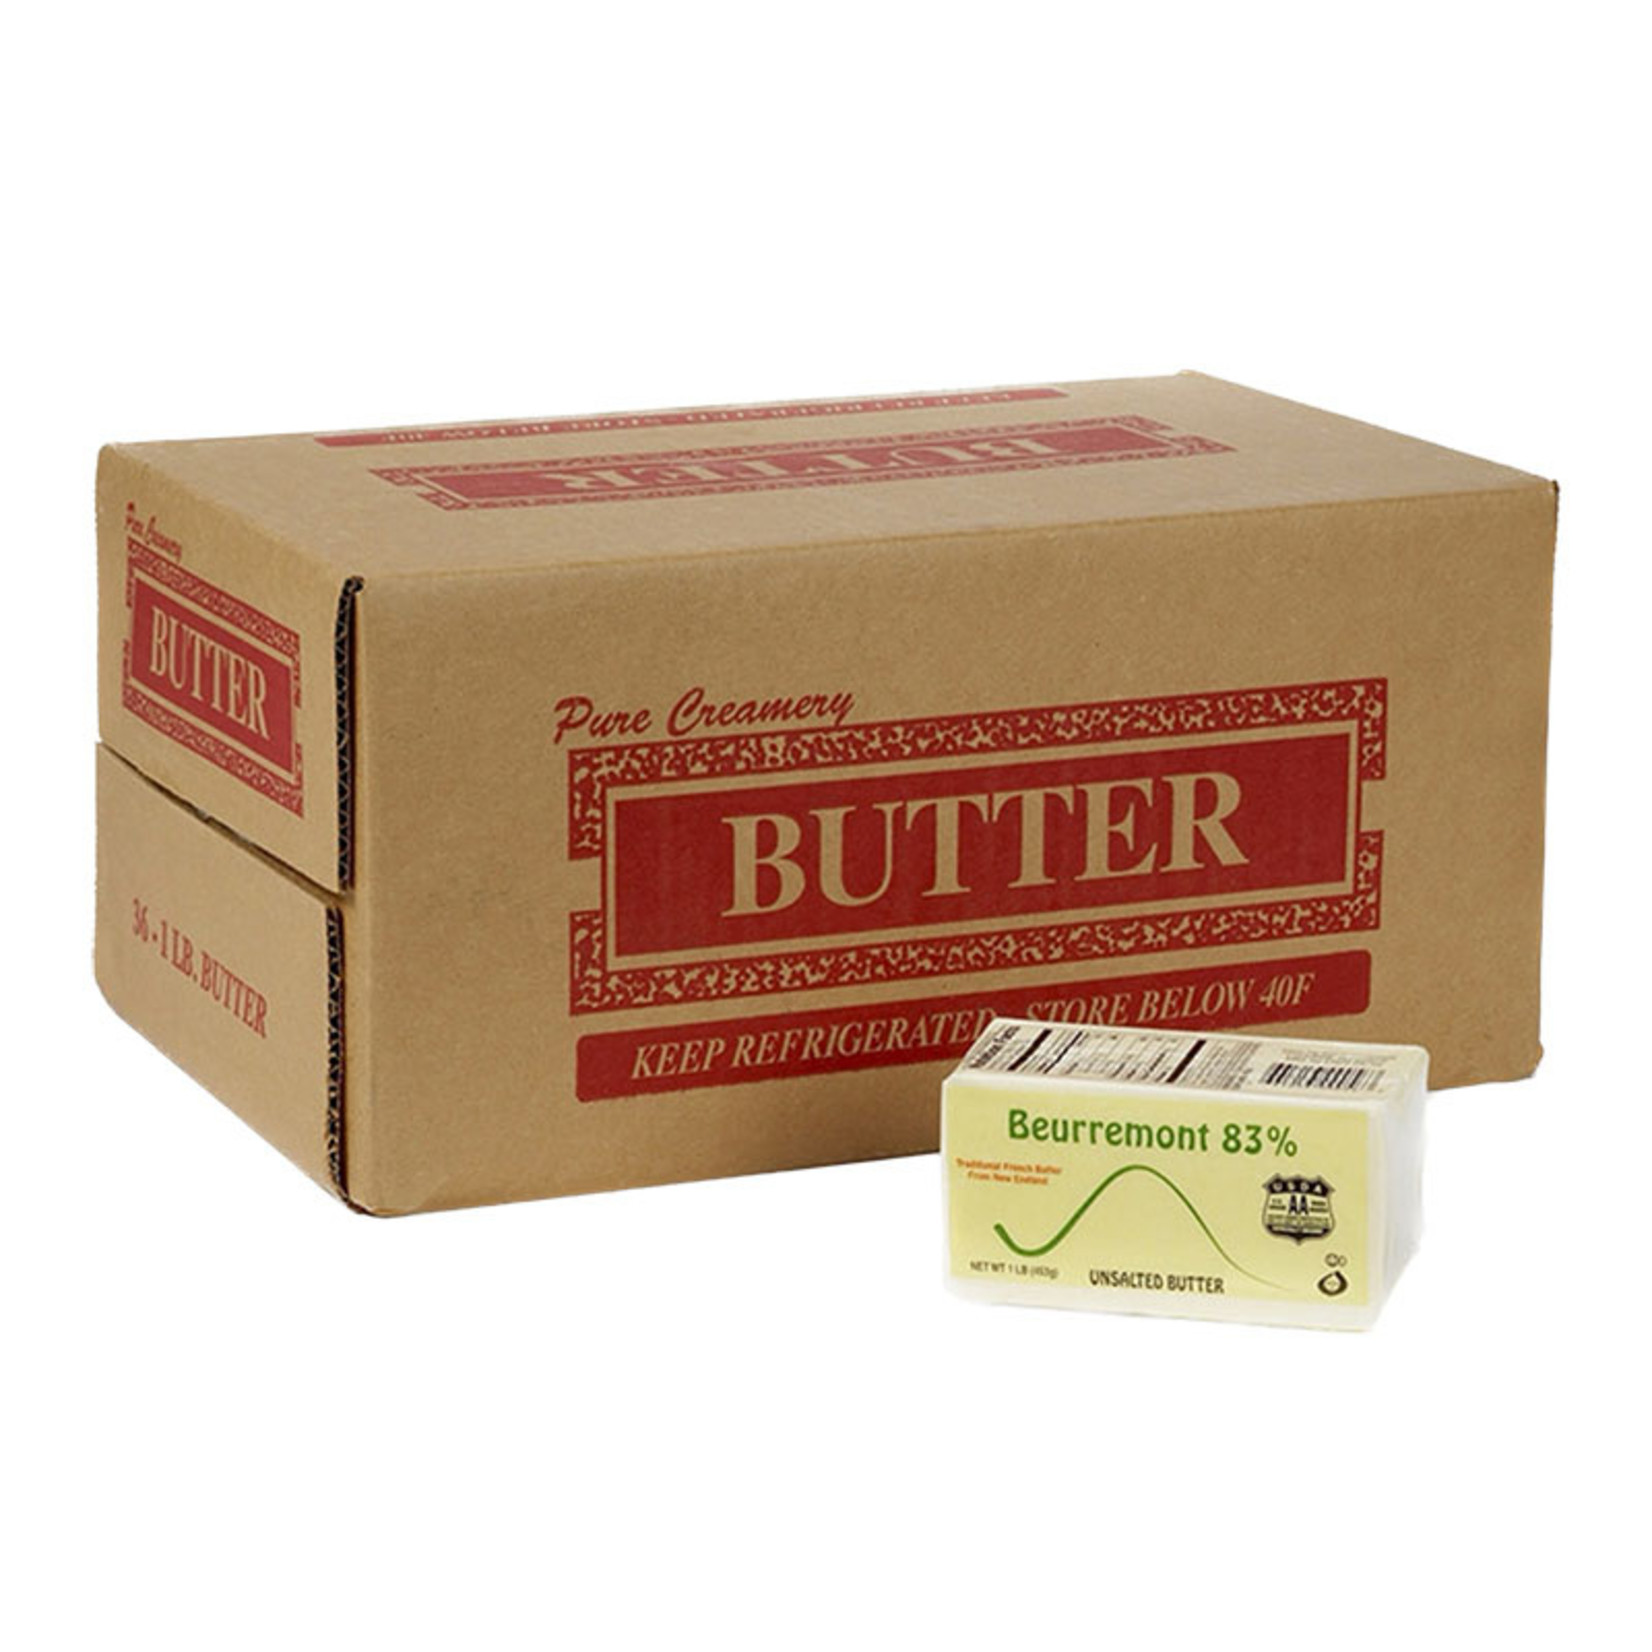 Beurremont 83% Unsalted Butter - 1 lb (box of 36), BUE100